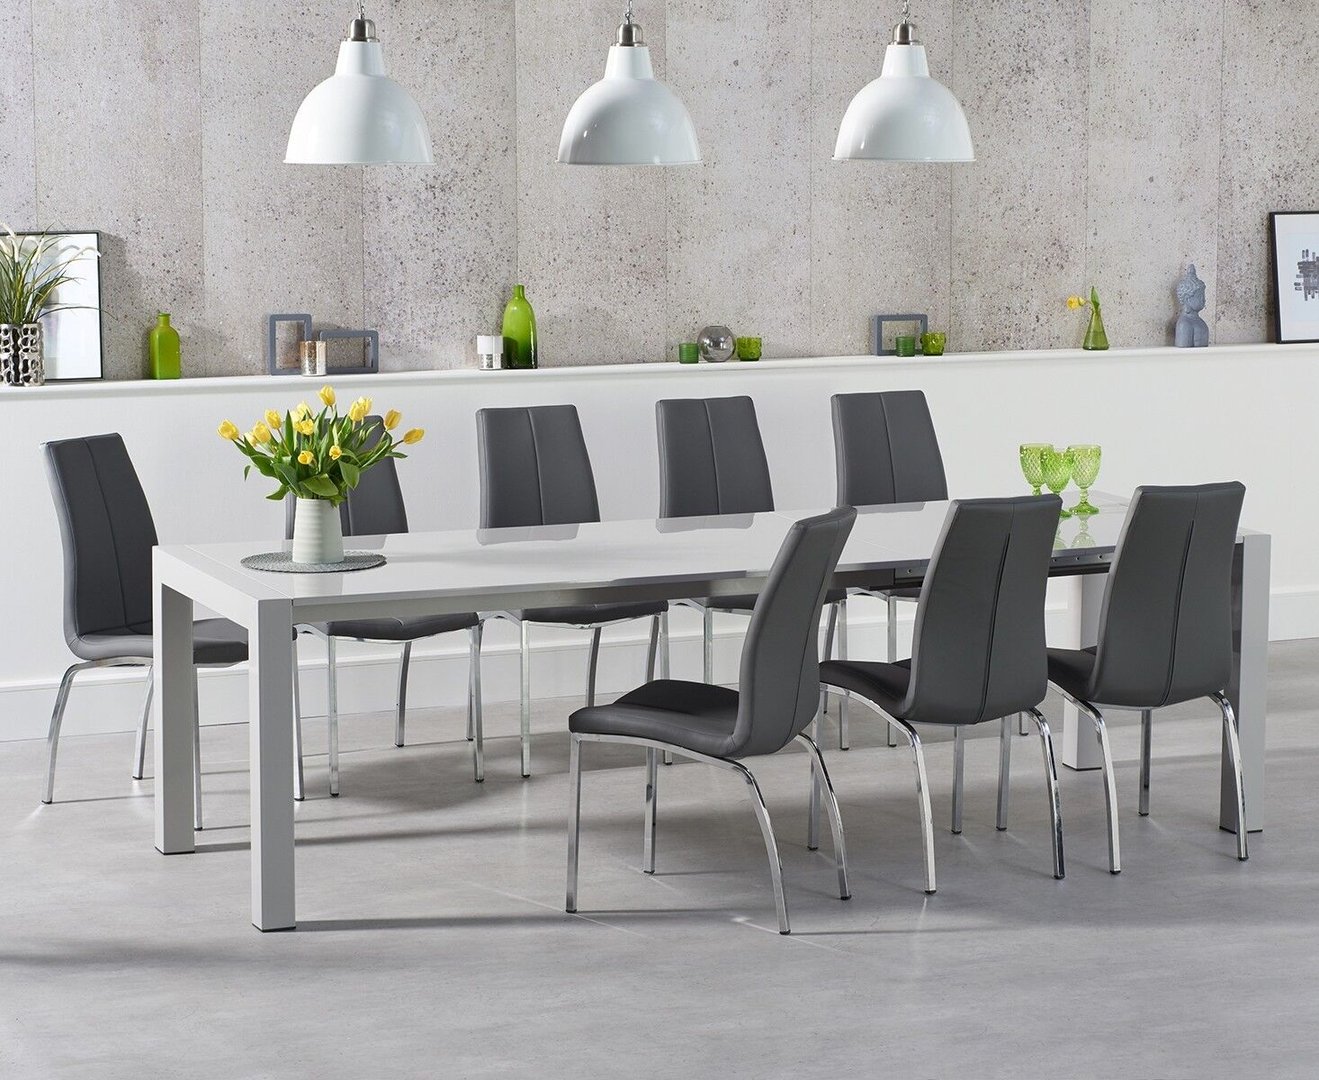 10 Seater Light Grey High Gloss Dining Table Chairs Homegenies